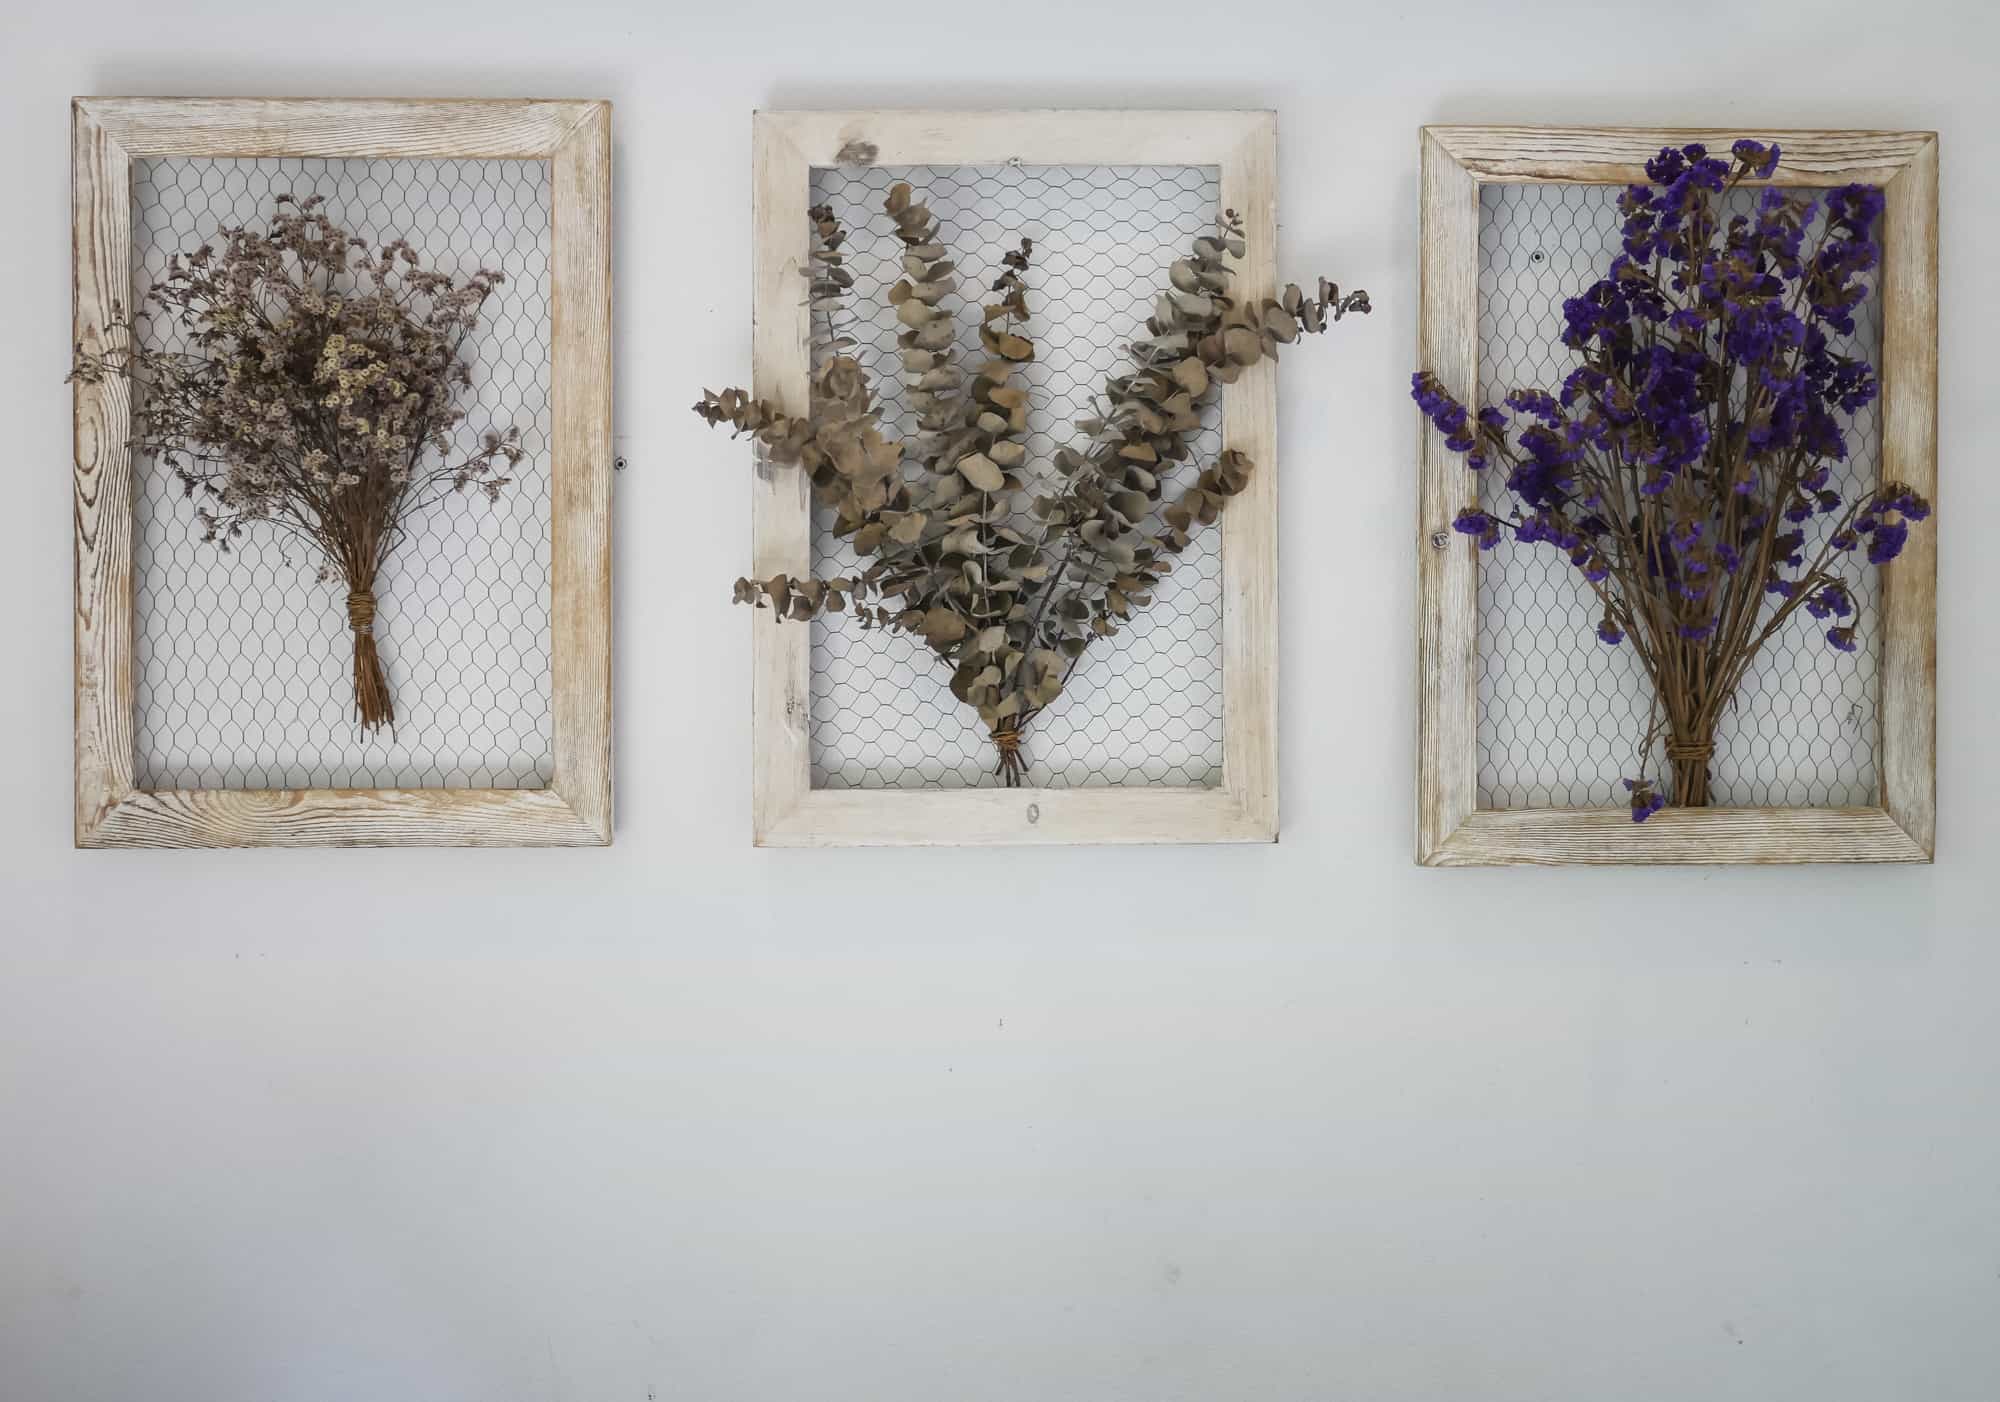 7 creative uses for your beautiful dried flowers - Gaia Flowers